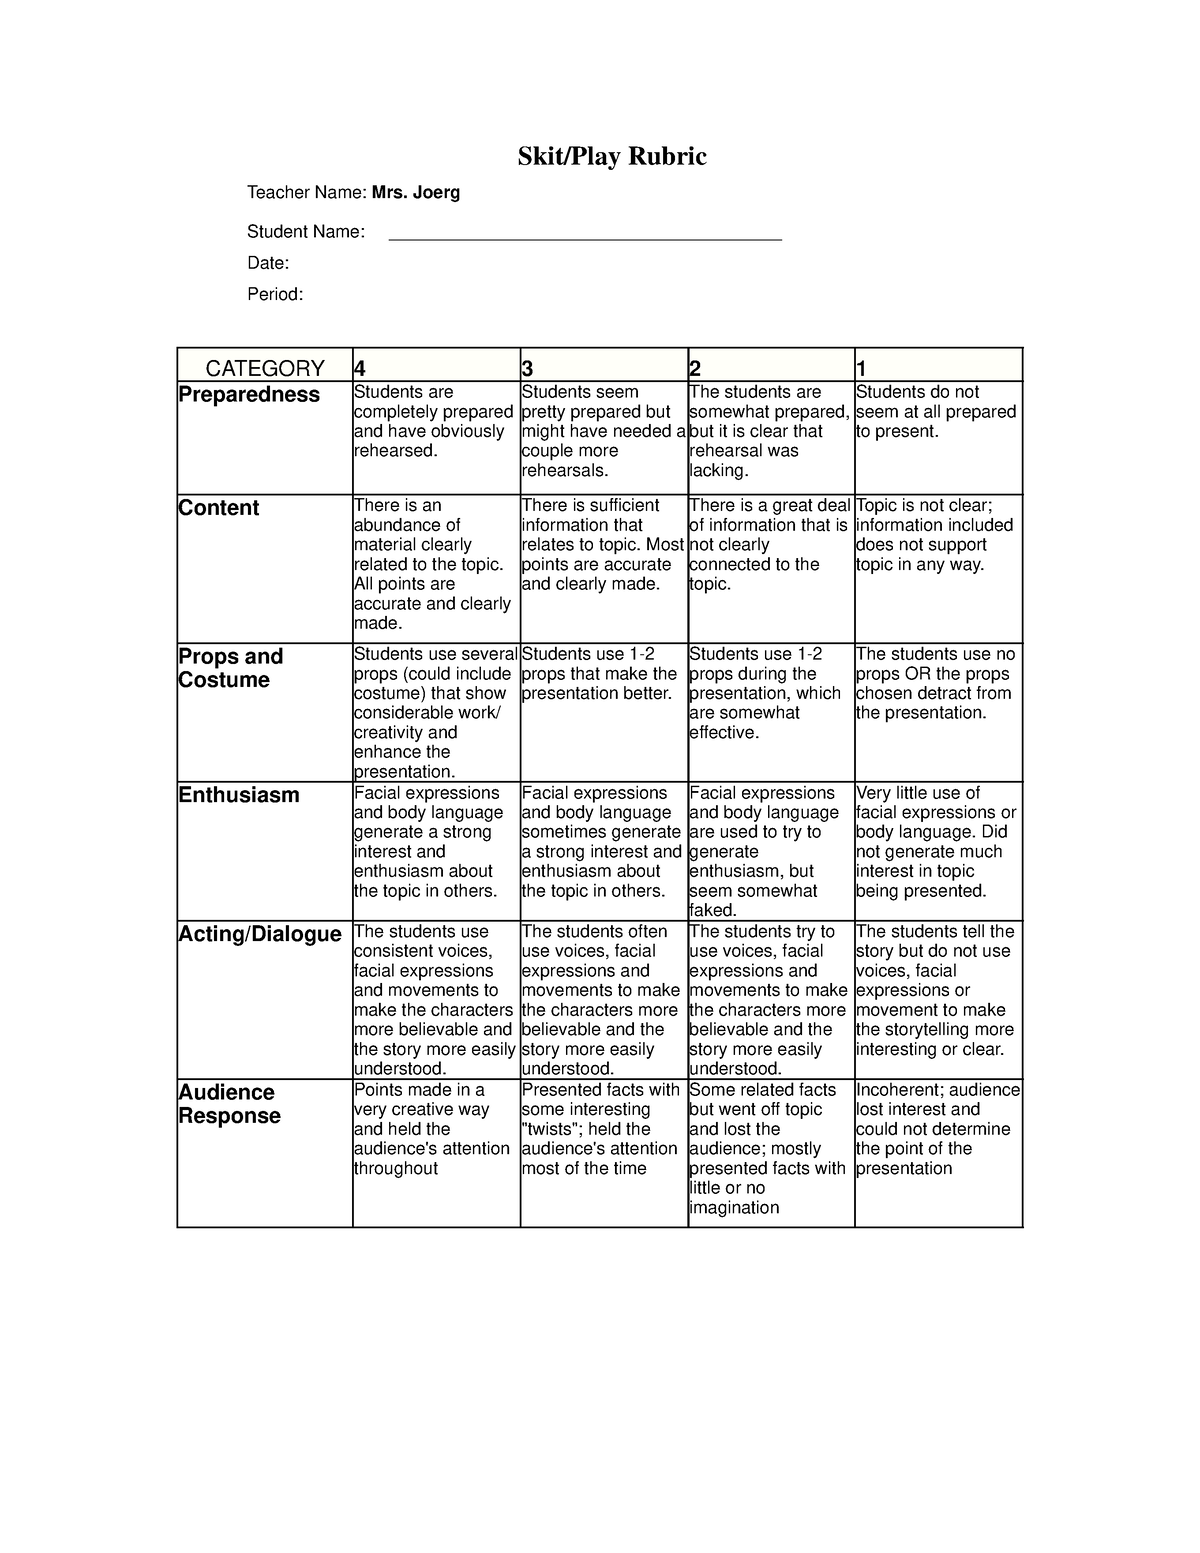 Spjoerg - this is a rubrics that will show - Skit/Play Rubric Teacher ...